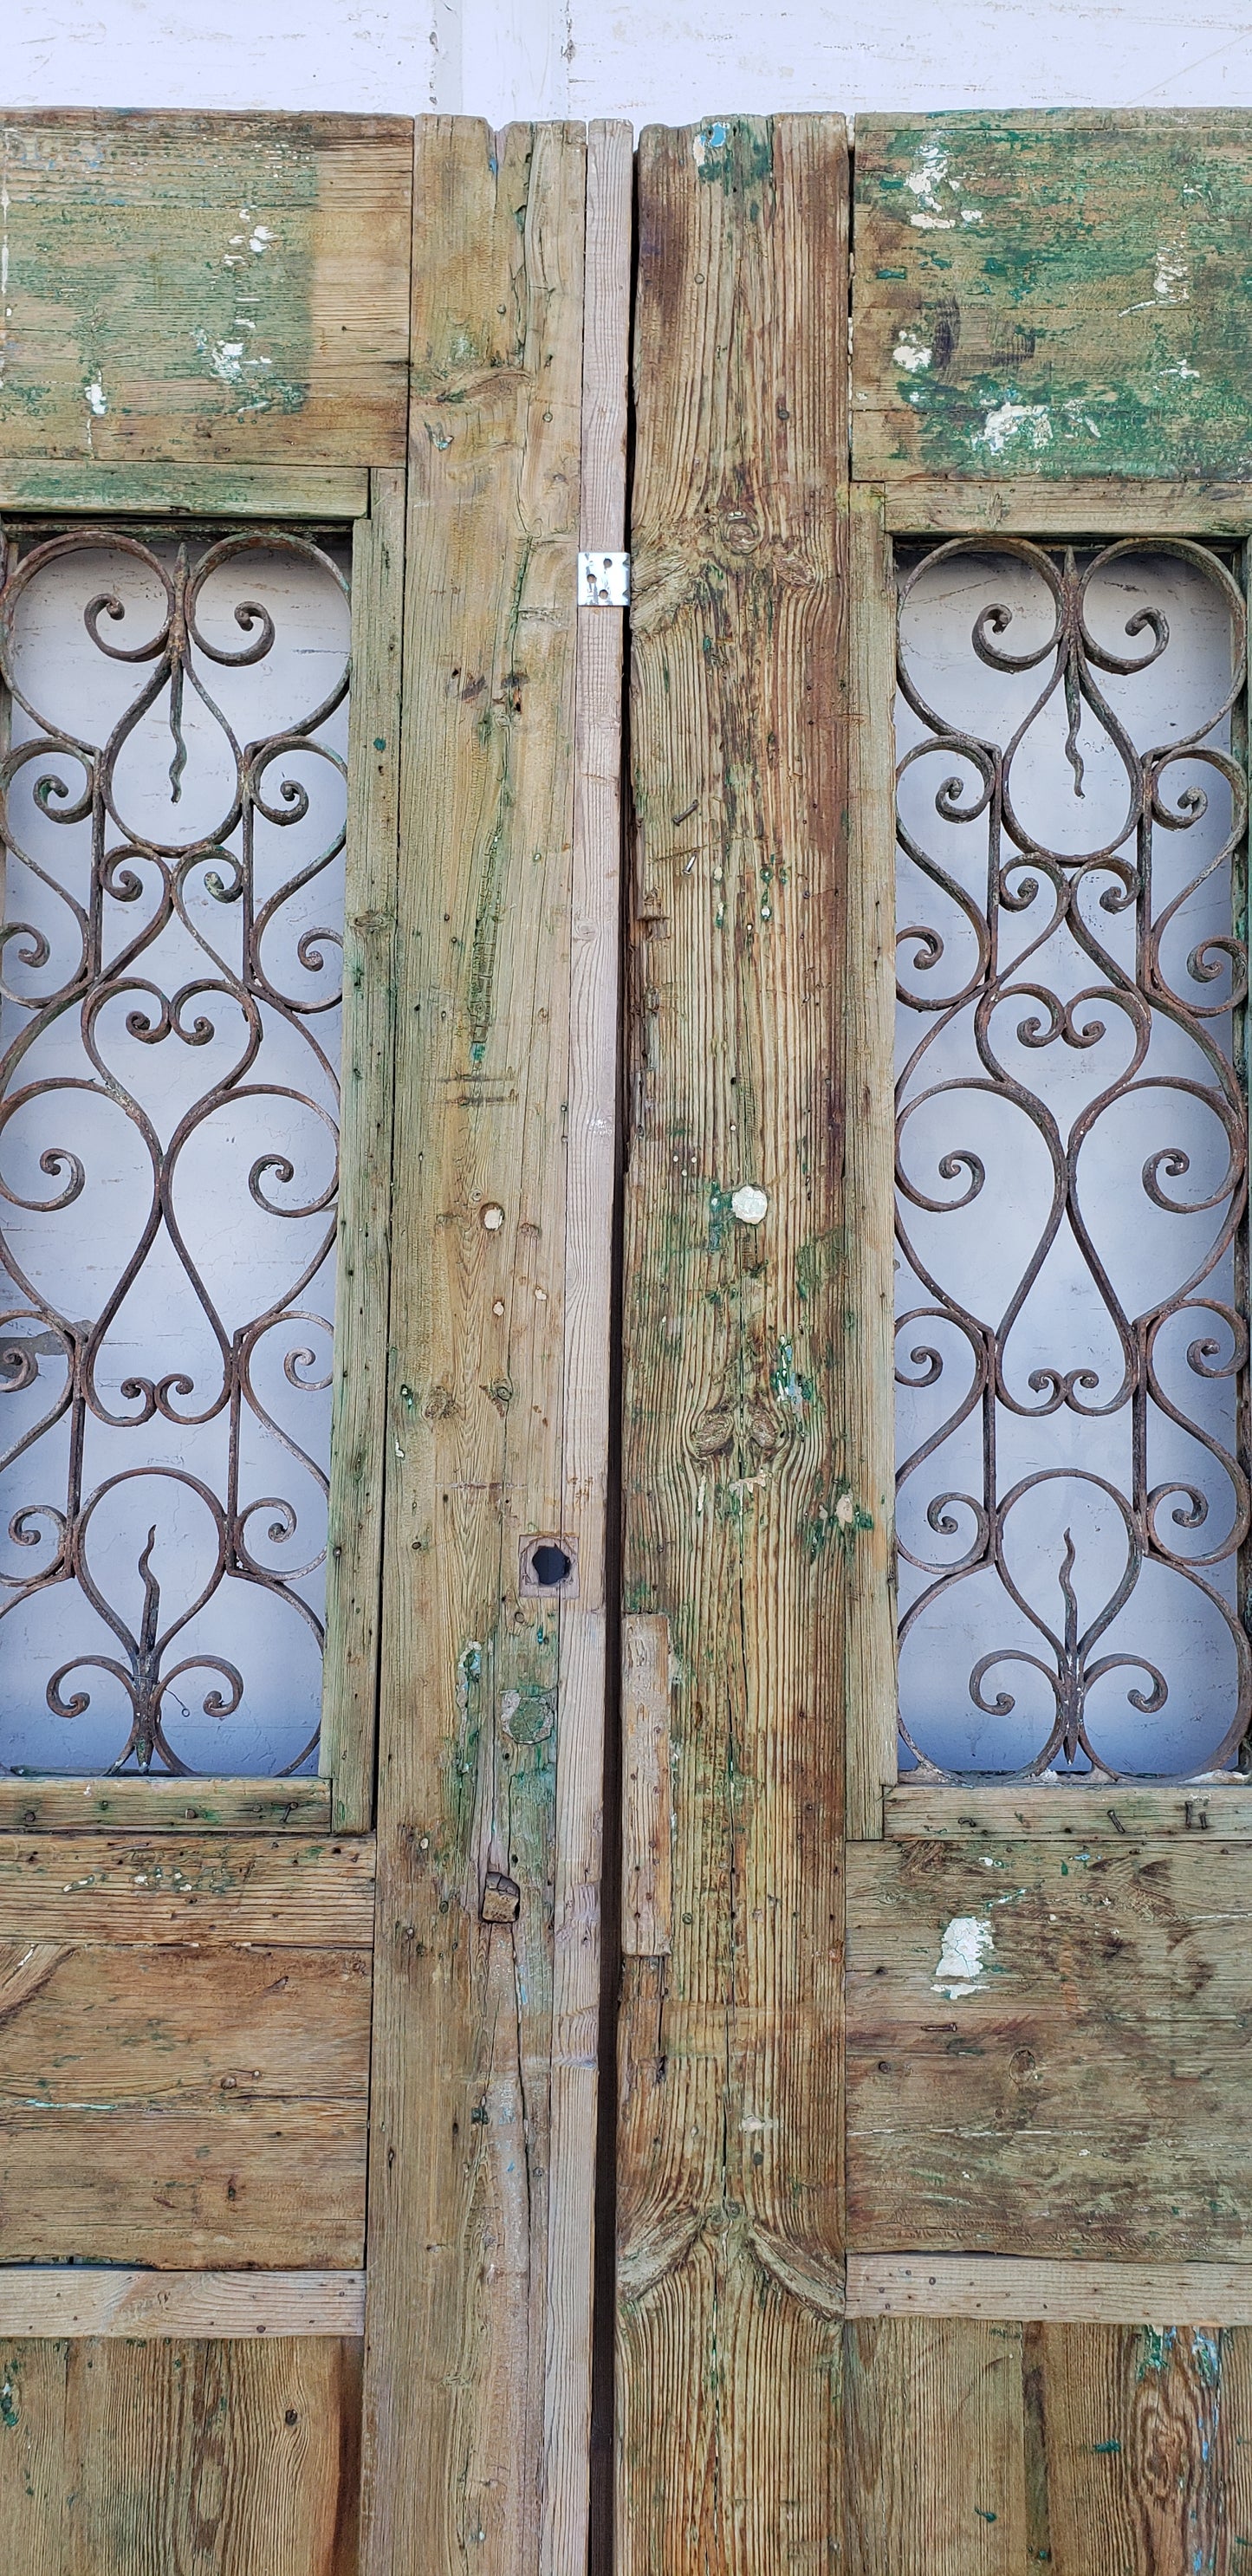 Pair of Ornate Wood Antique Carved Doors with Iron Inserts, c.1880 France (no glass)